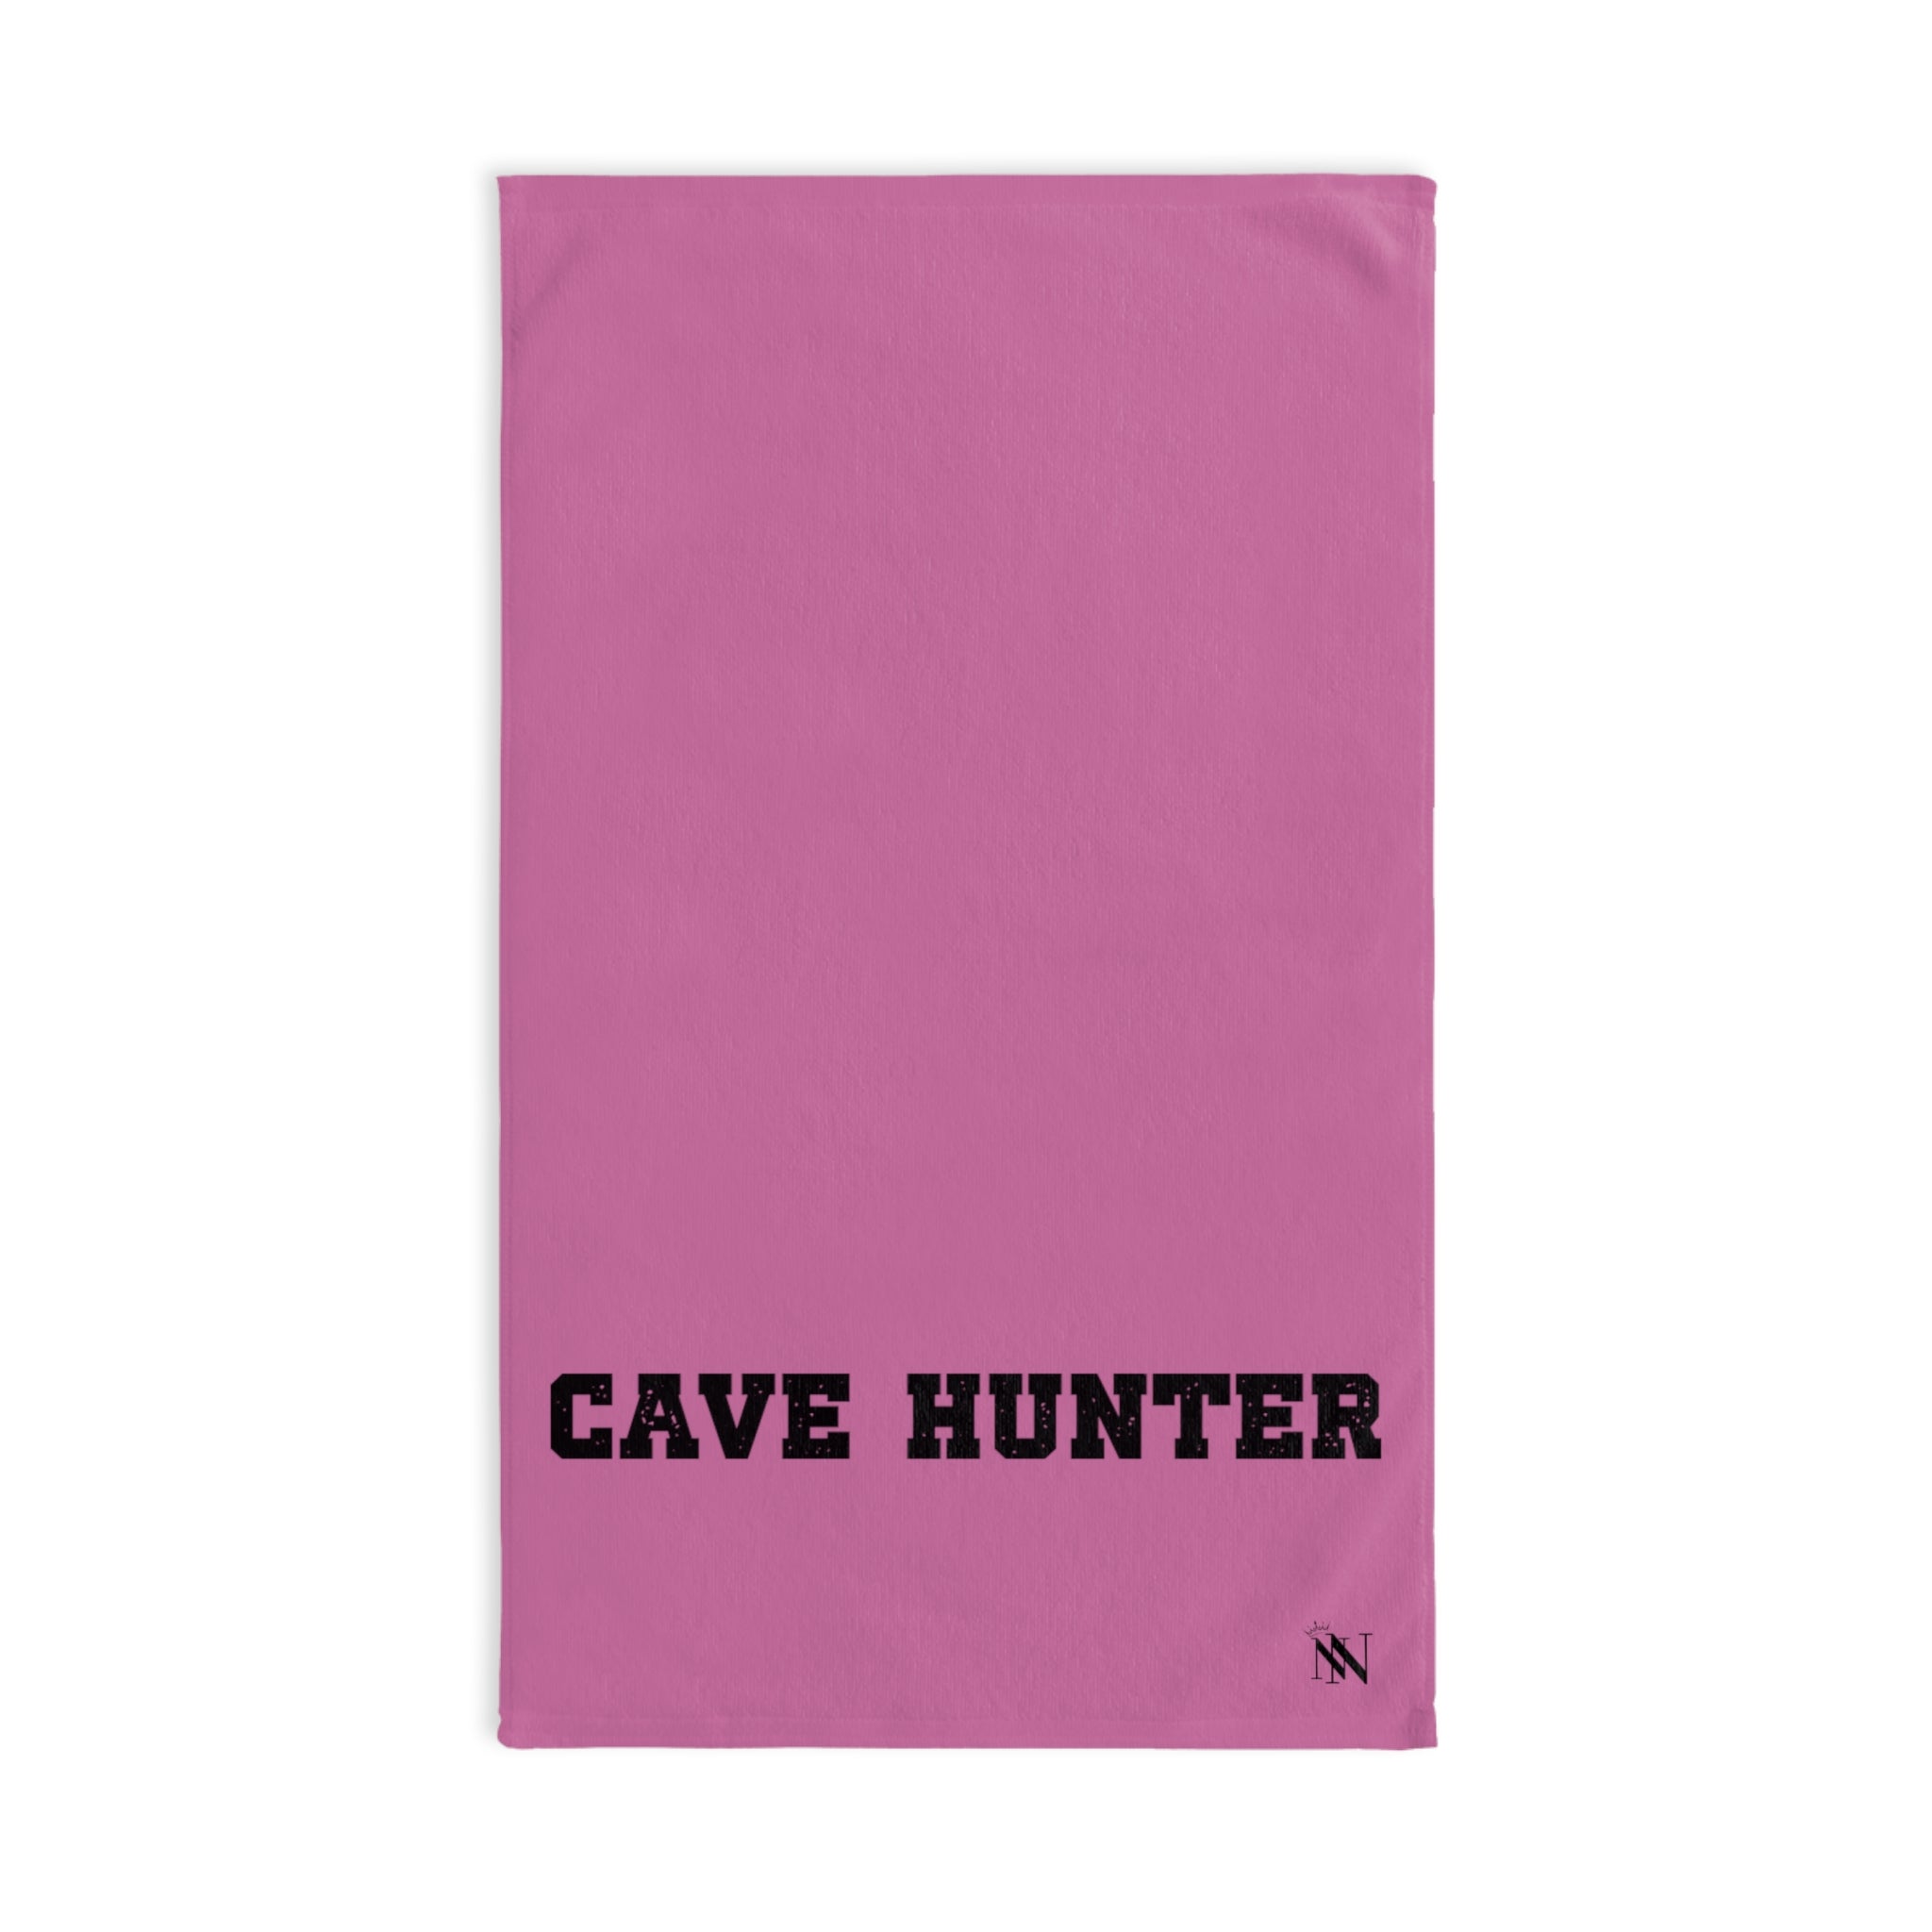 Cave Hunter Pink | Novelty Gifts for Boyfriend, Funny Towel Romantic Gift for Wedding Couple Fiance First Year Anniversary Valentines, Party Gag Gifts, Joke Humor Cloth for Husband Men BF NECTAR NAPKINS